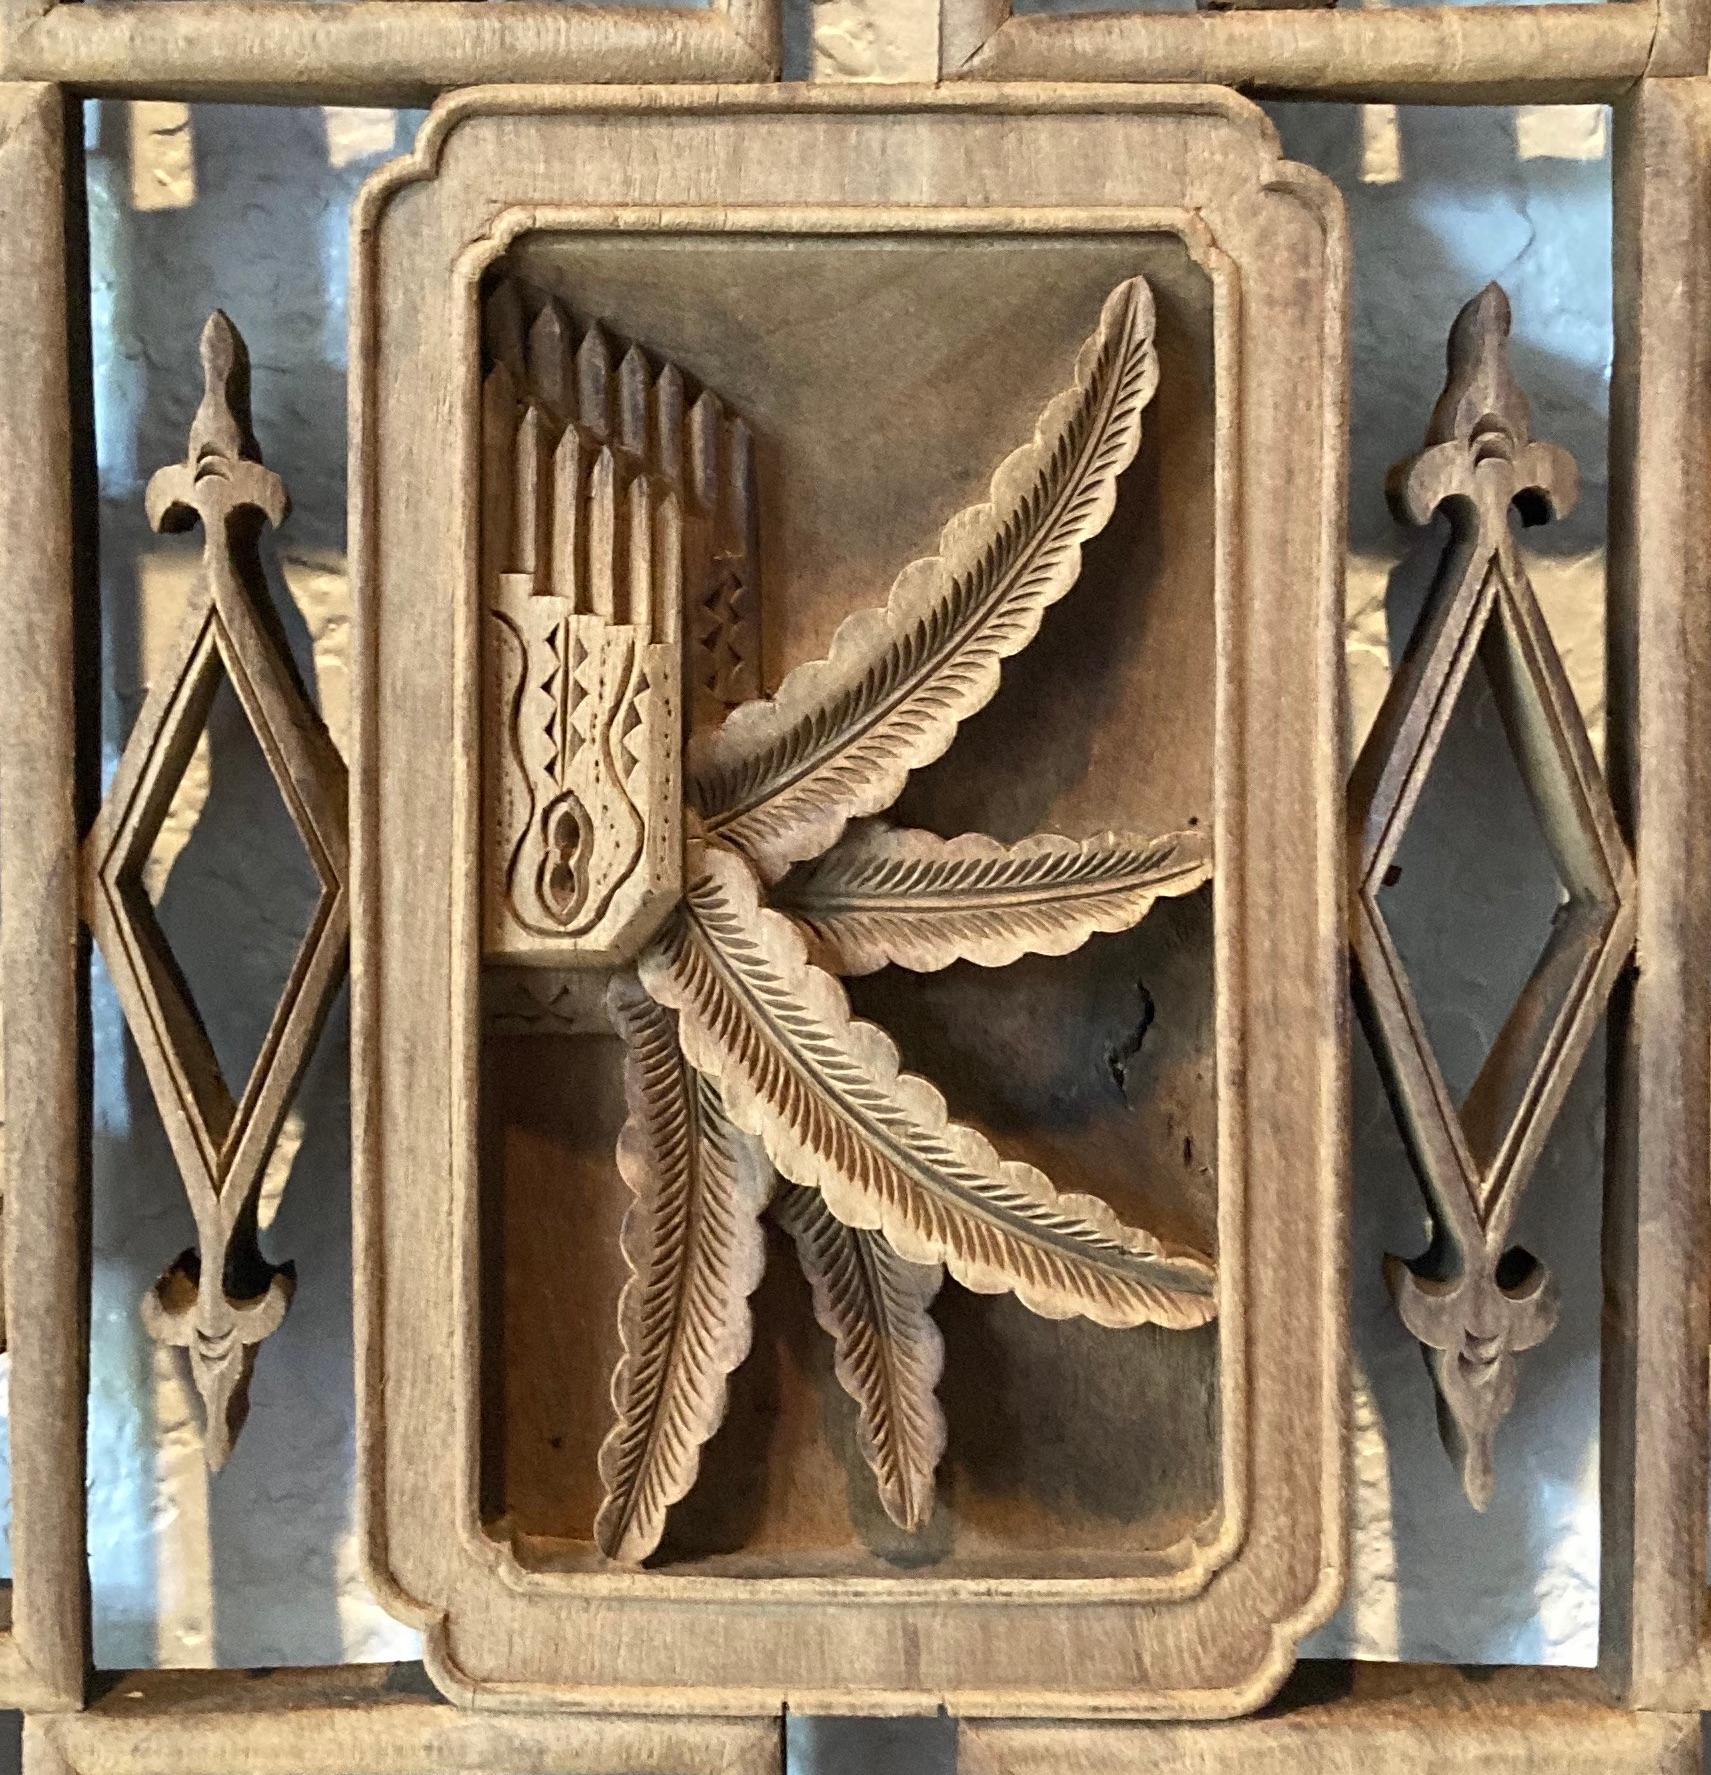 Unframed panel with openwork carving. Carved from solid piece of wood. Rectangular center carving with palm leaf and floral motif.